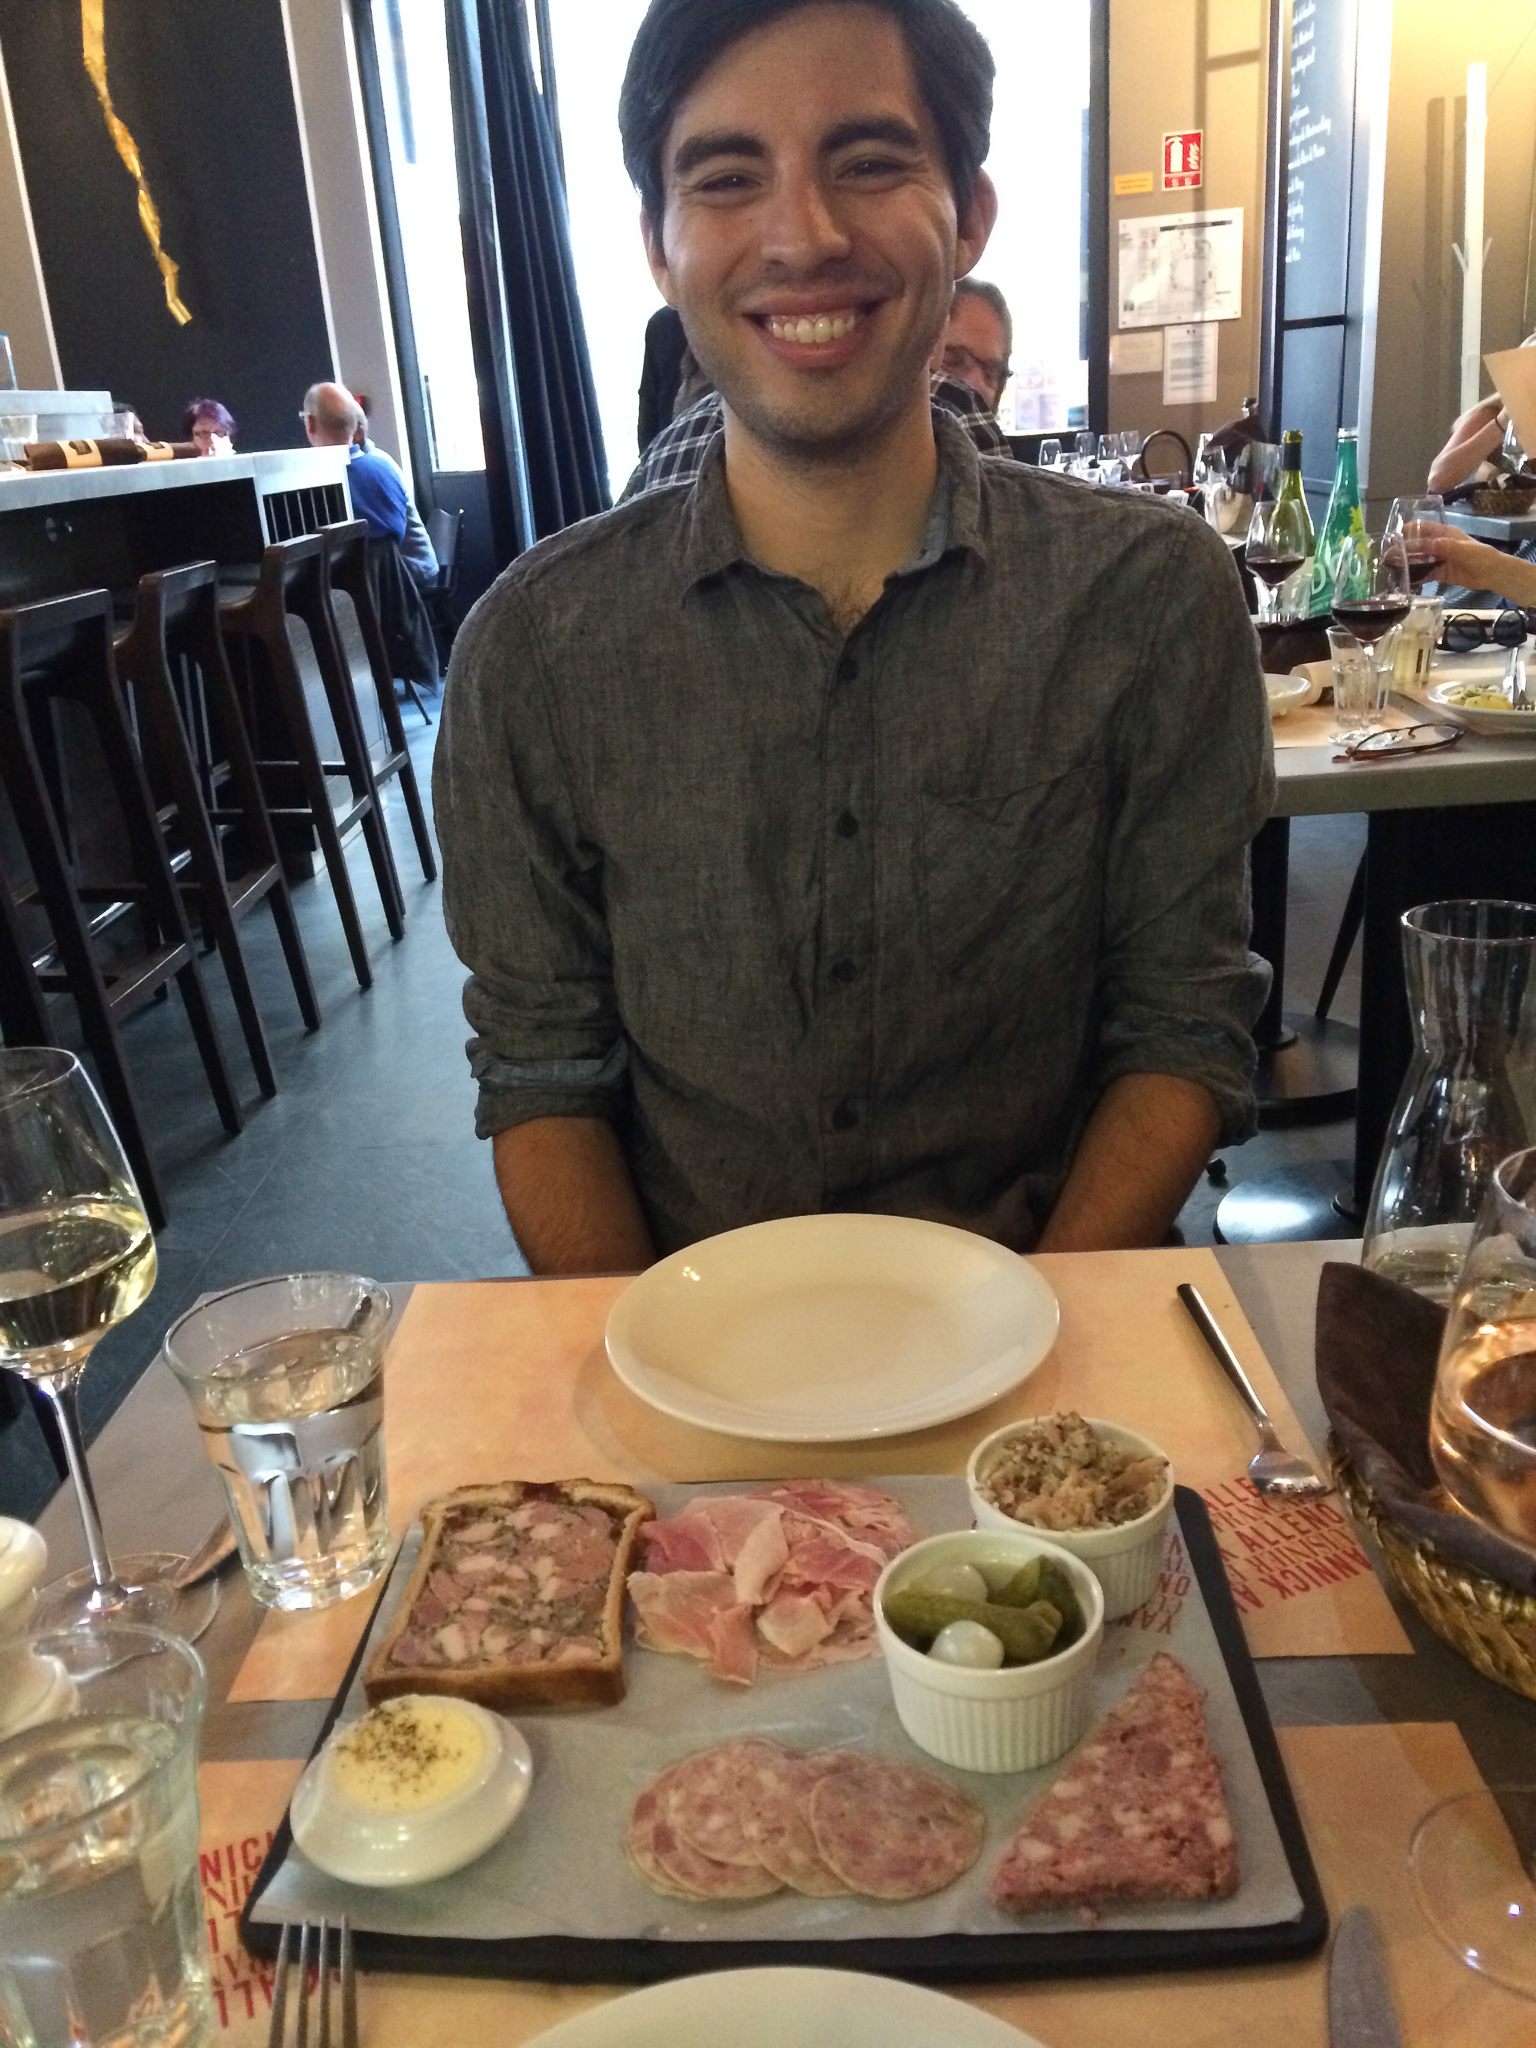 Enjoying charcuterie and cornichons at Terroir Parisien. The French like to start dinner with a plate full of meat. I say, pourquoi-pas?